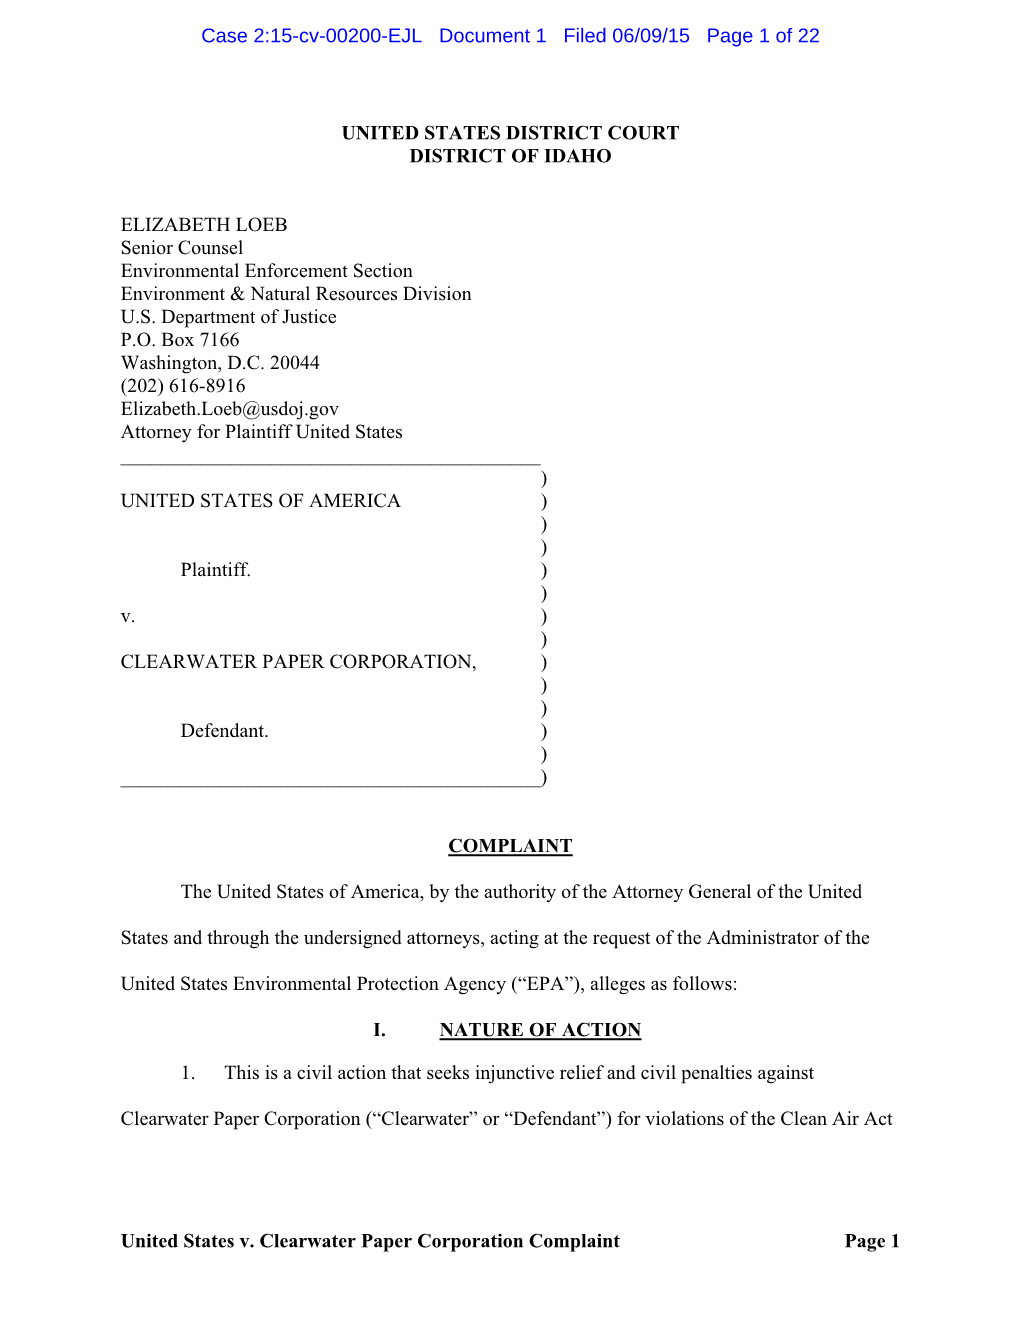 United States V. Clearwater Paper Corporation Complaint Page 1